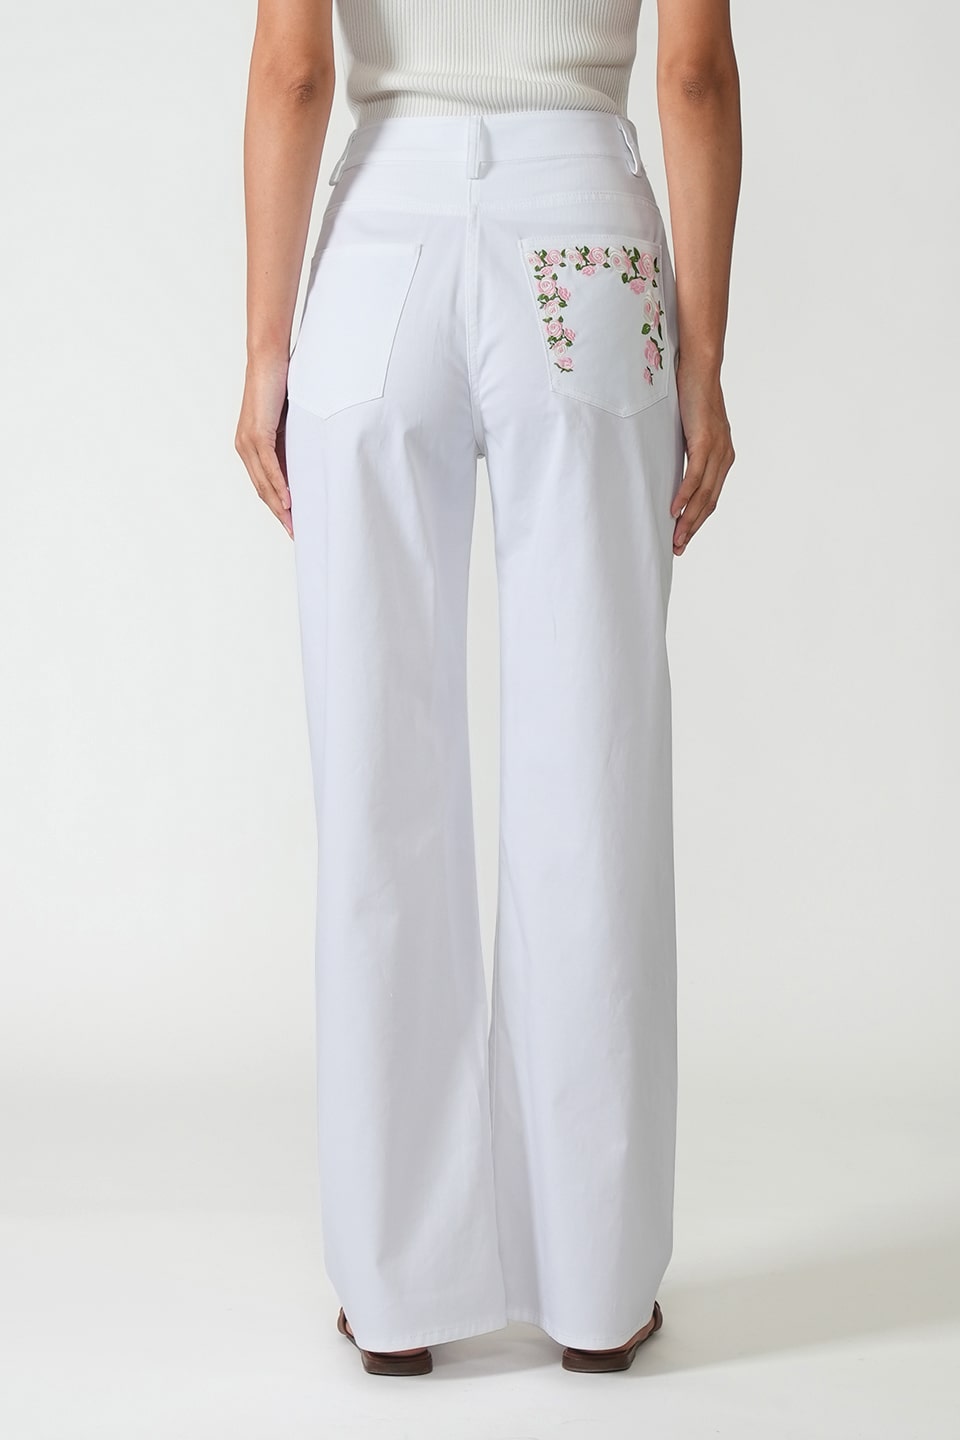 Designer White Women pants, shop online with free delivery in UAE. Product gallery 4